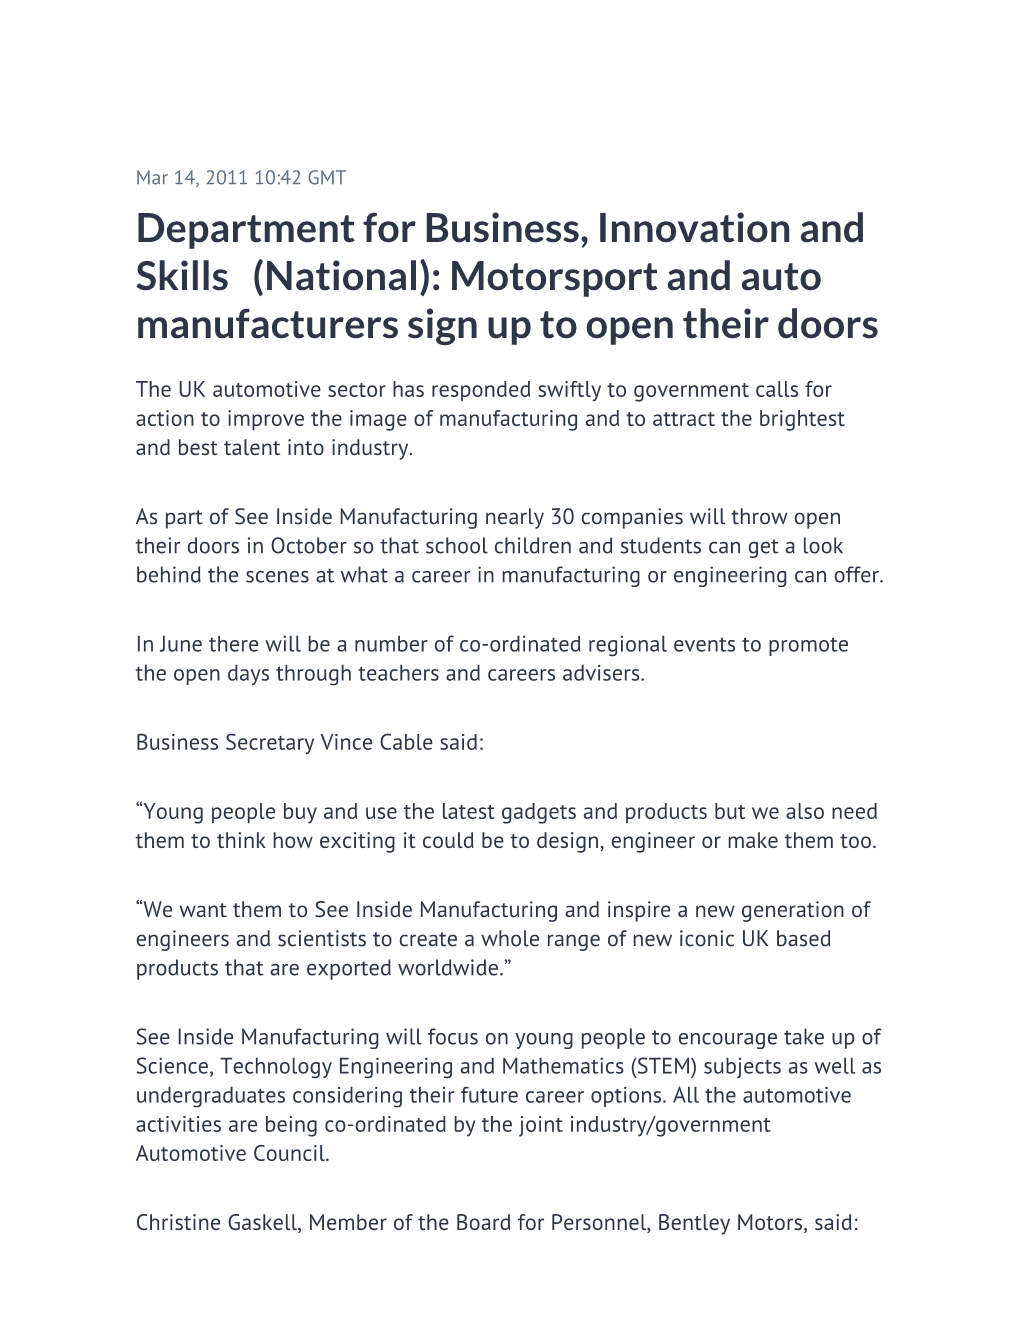 Department for Business, Innovation and Skills (National): Motorsport and Auto Manufacturers Sign up to Open Their Doors